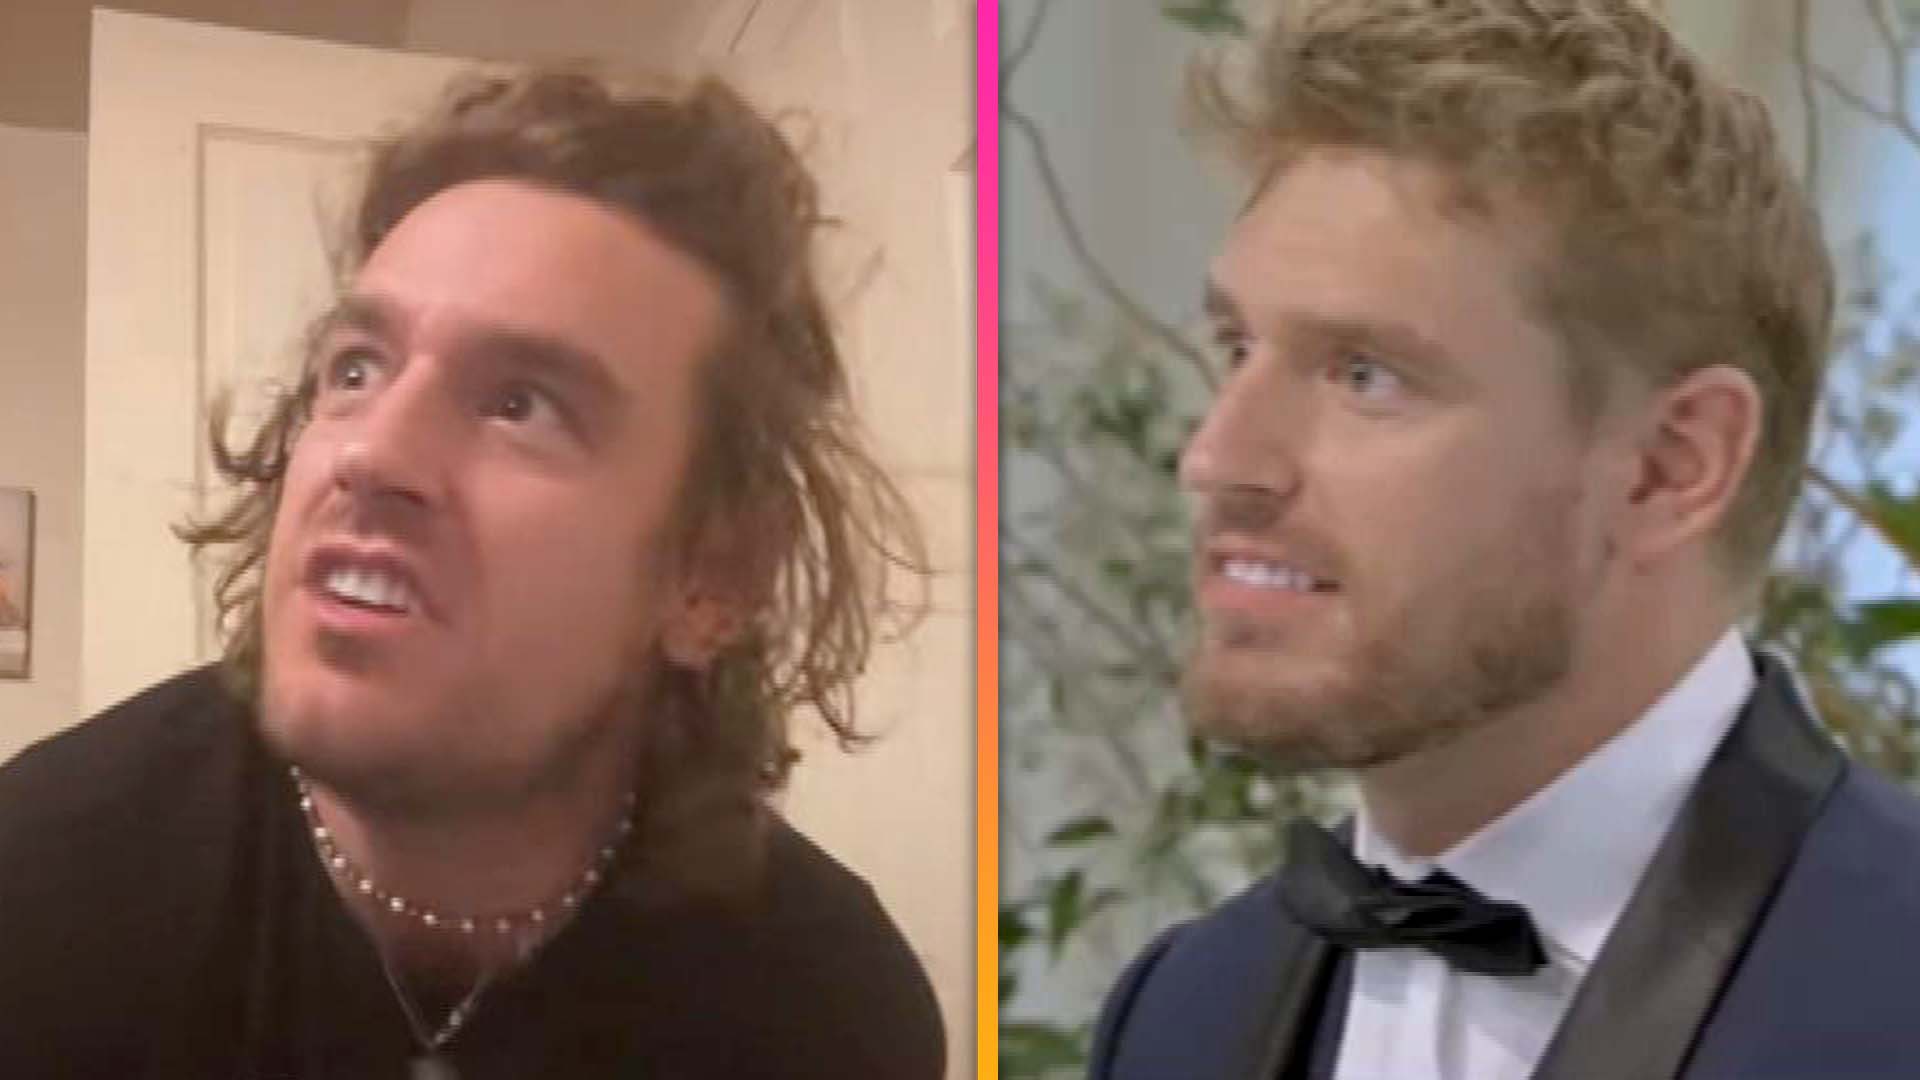 Shayne Blasted Perfect Match's 'Where Are They Now' Update & Fans Are  Calling It A 'Waste' - Narcity